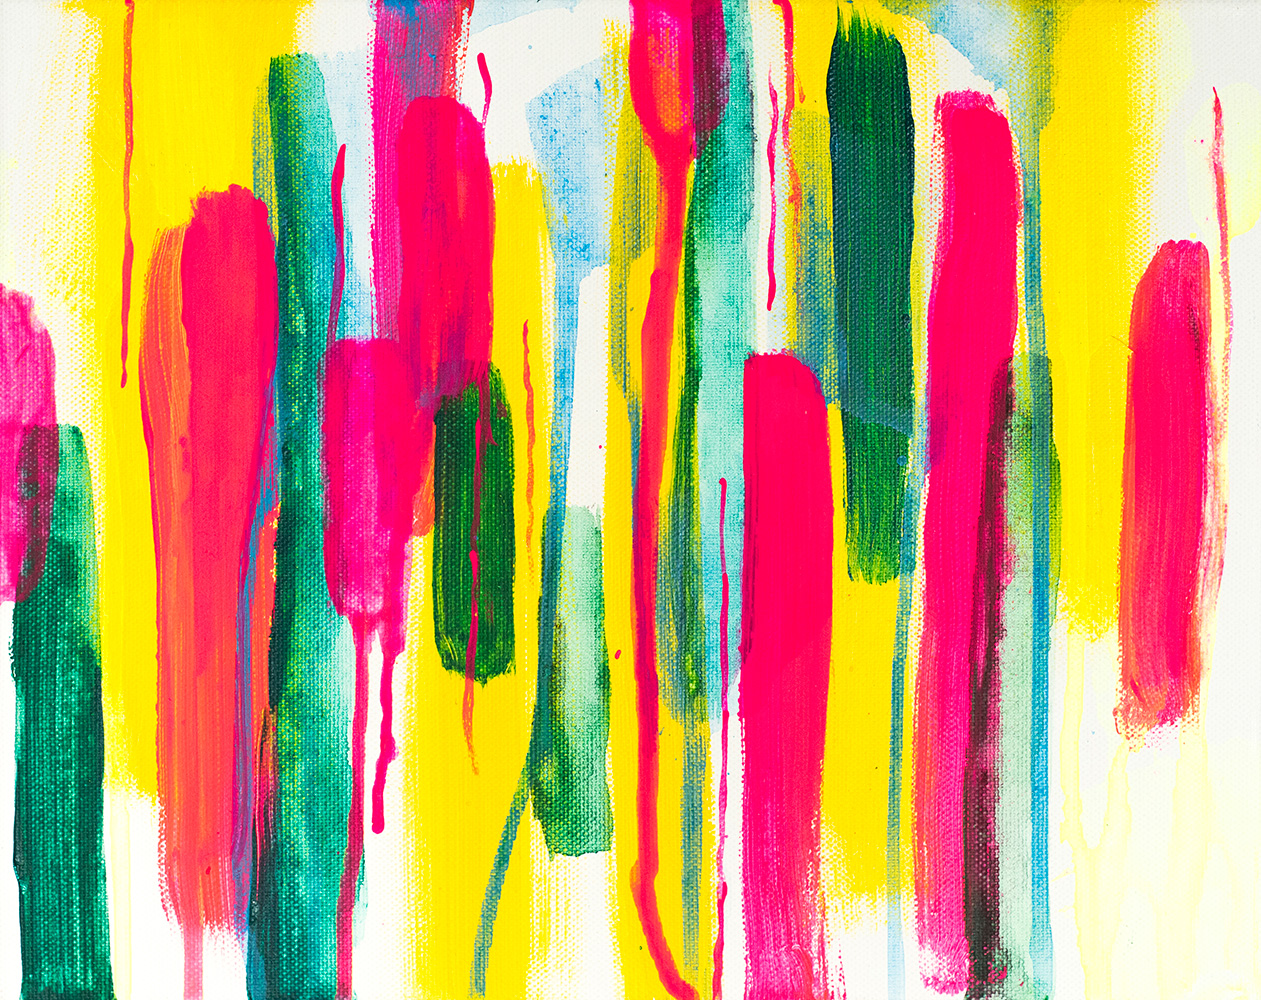 Franziska Schwade - Daily Painting 151026 "Zero Enthusiasm" Acrylics on stretched canvas 24x30 cm / 9.4x11.8 inch